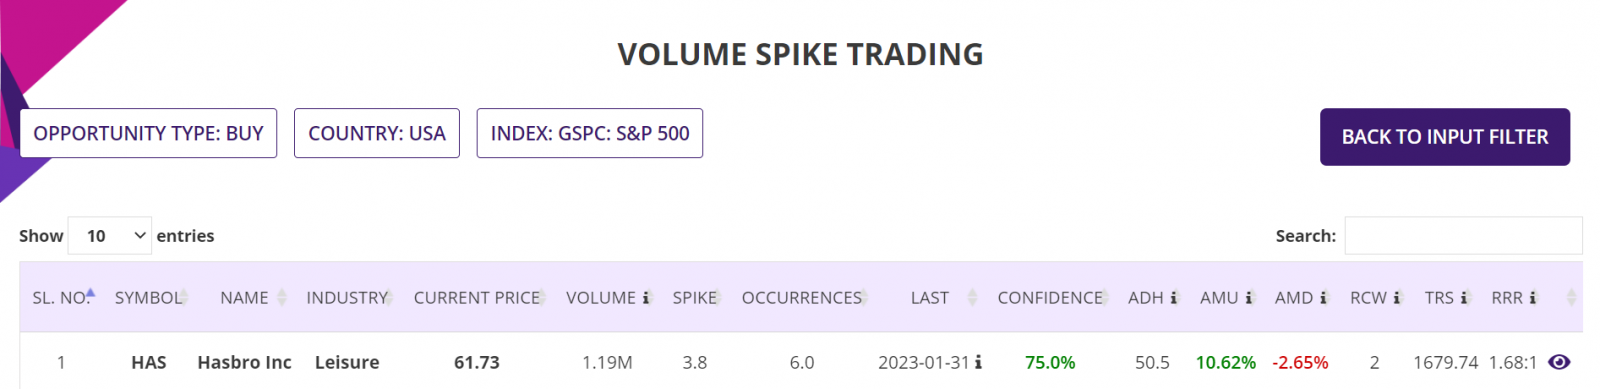 Volume spike trading strategy, summary report, S&P500 Stocks